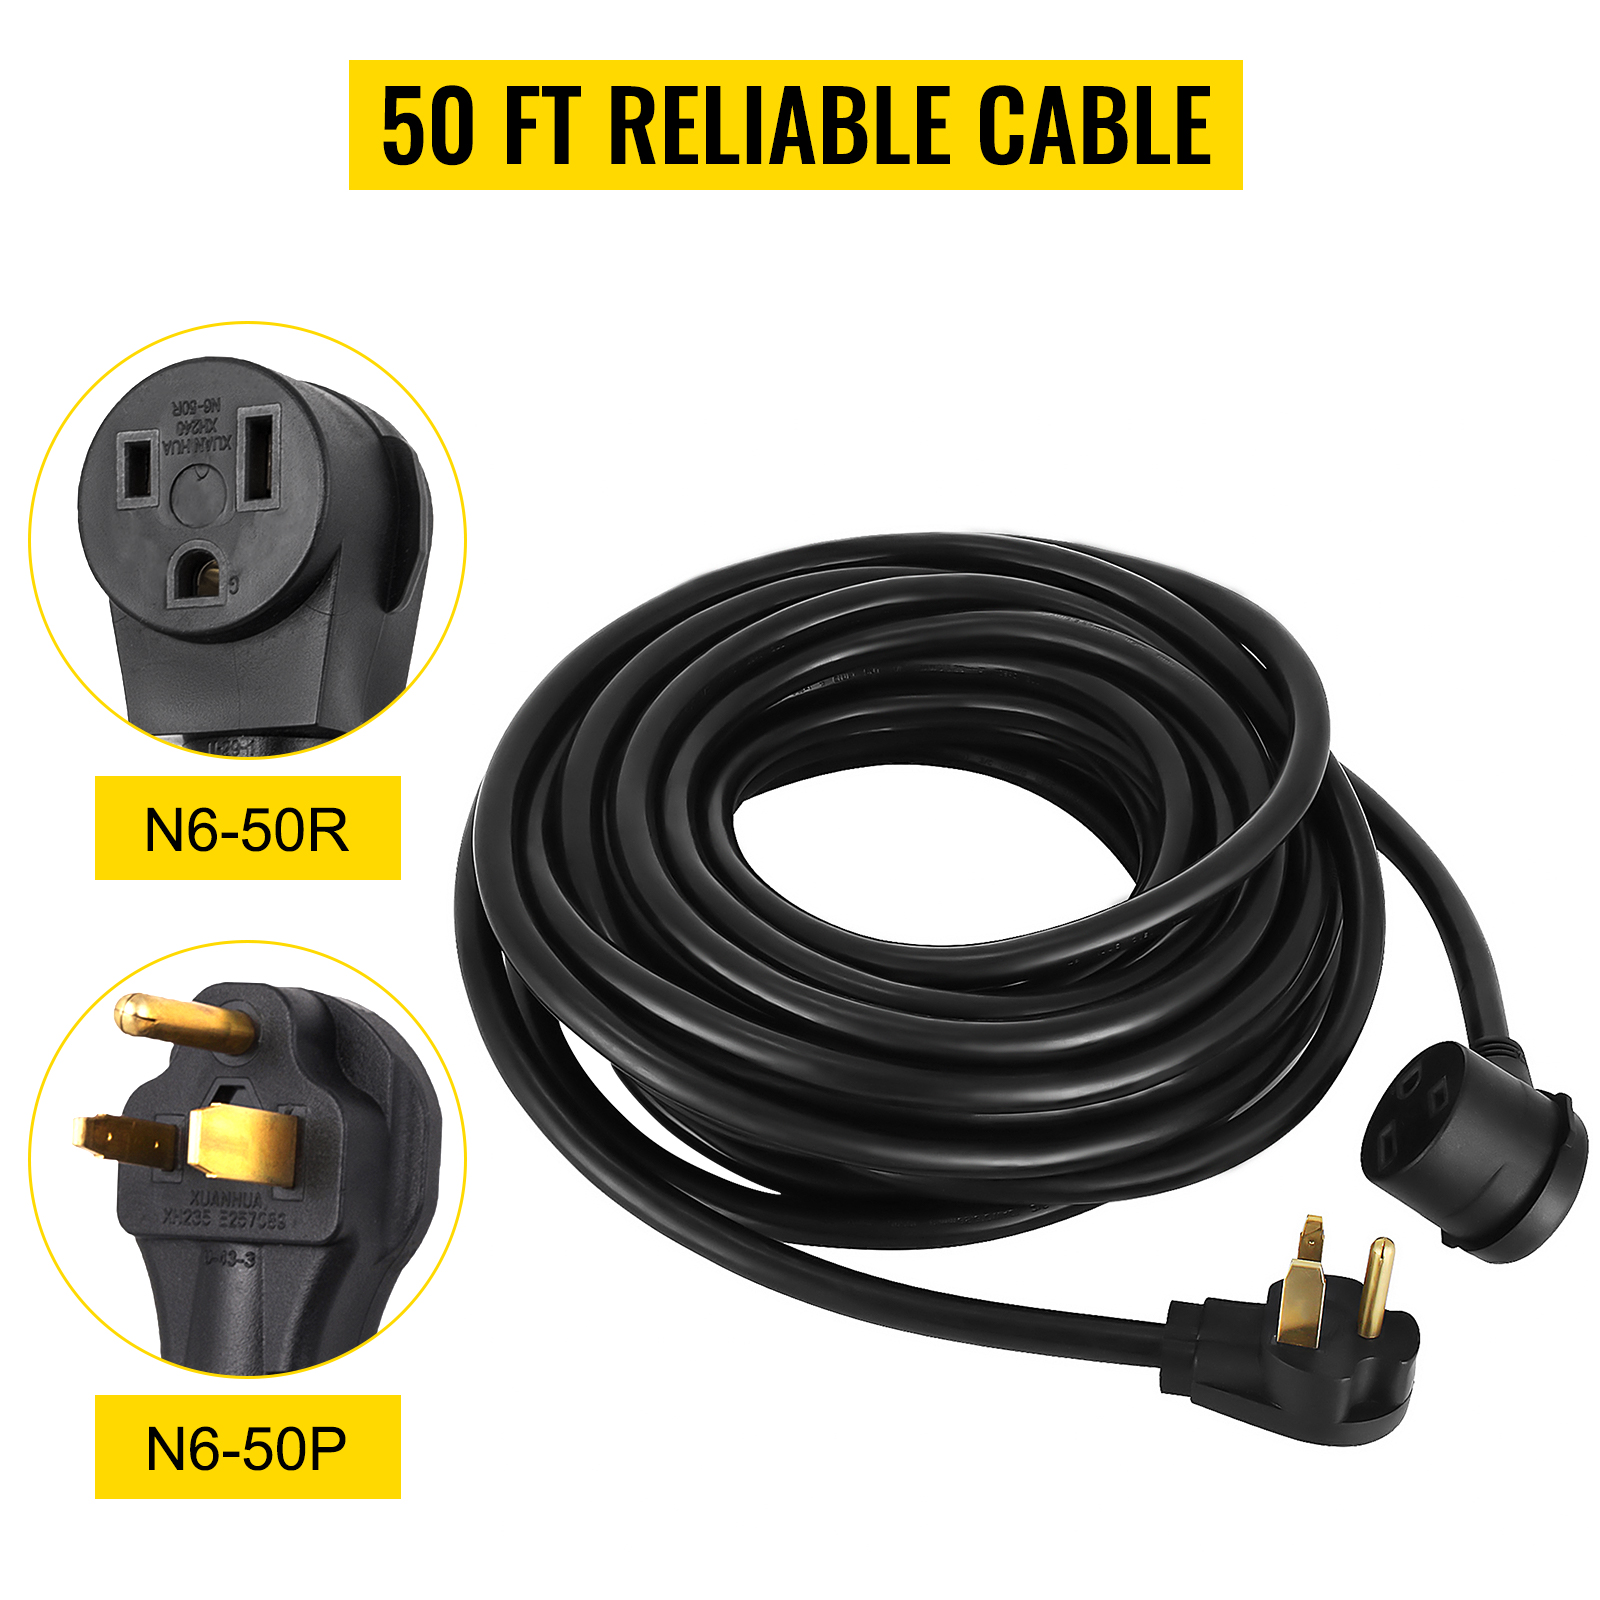 Details about   50FT Extension Cord Range Stove Oven Welder 10-50P TO 10-50R 6/3 6AWG 6-Gauge 